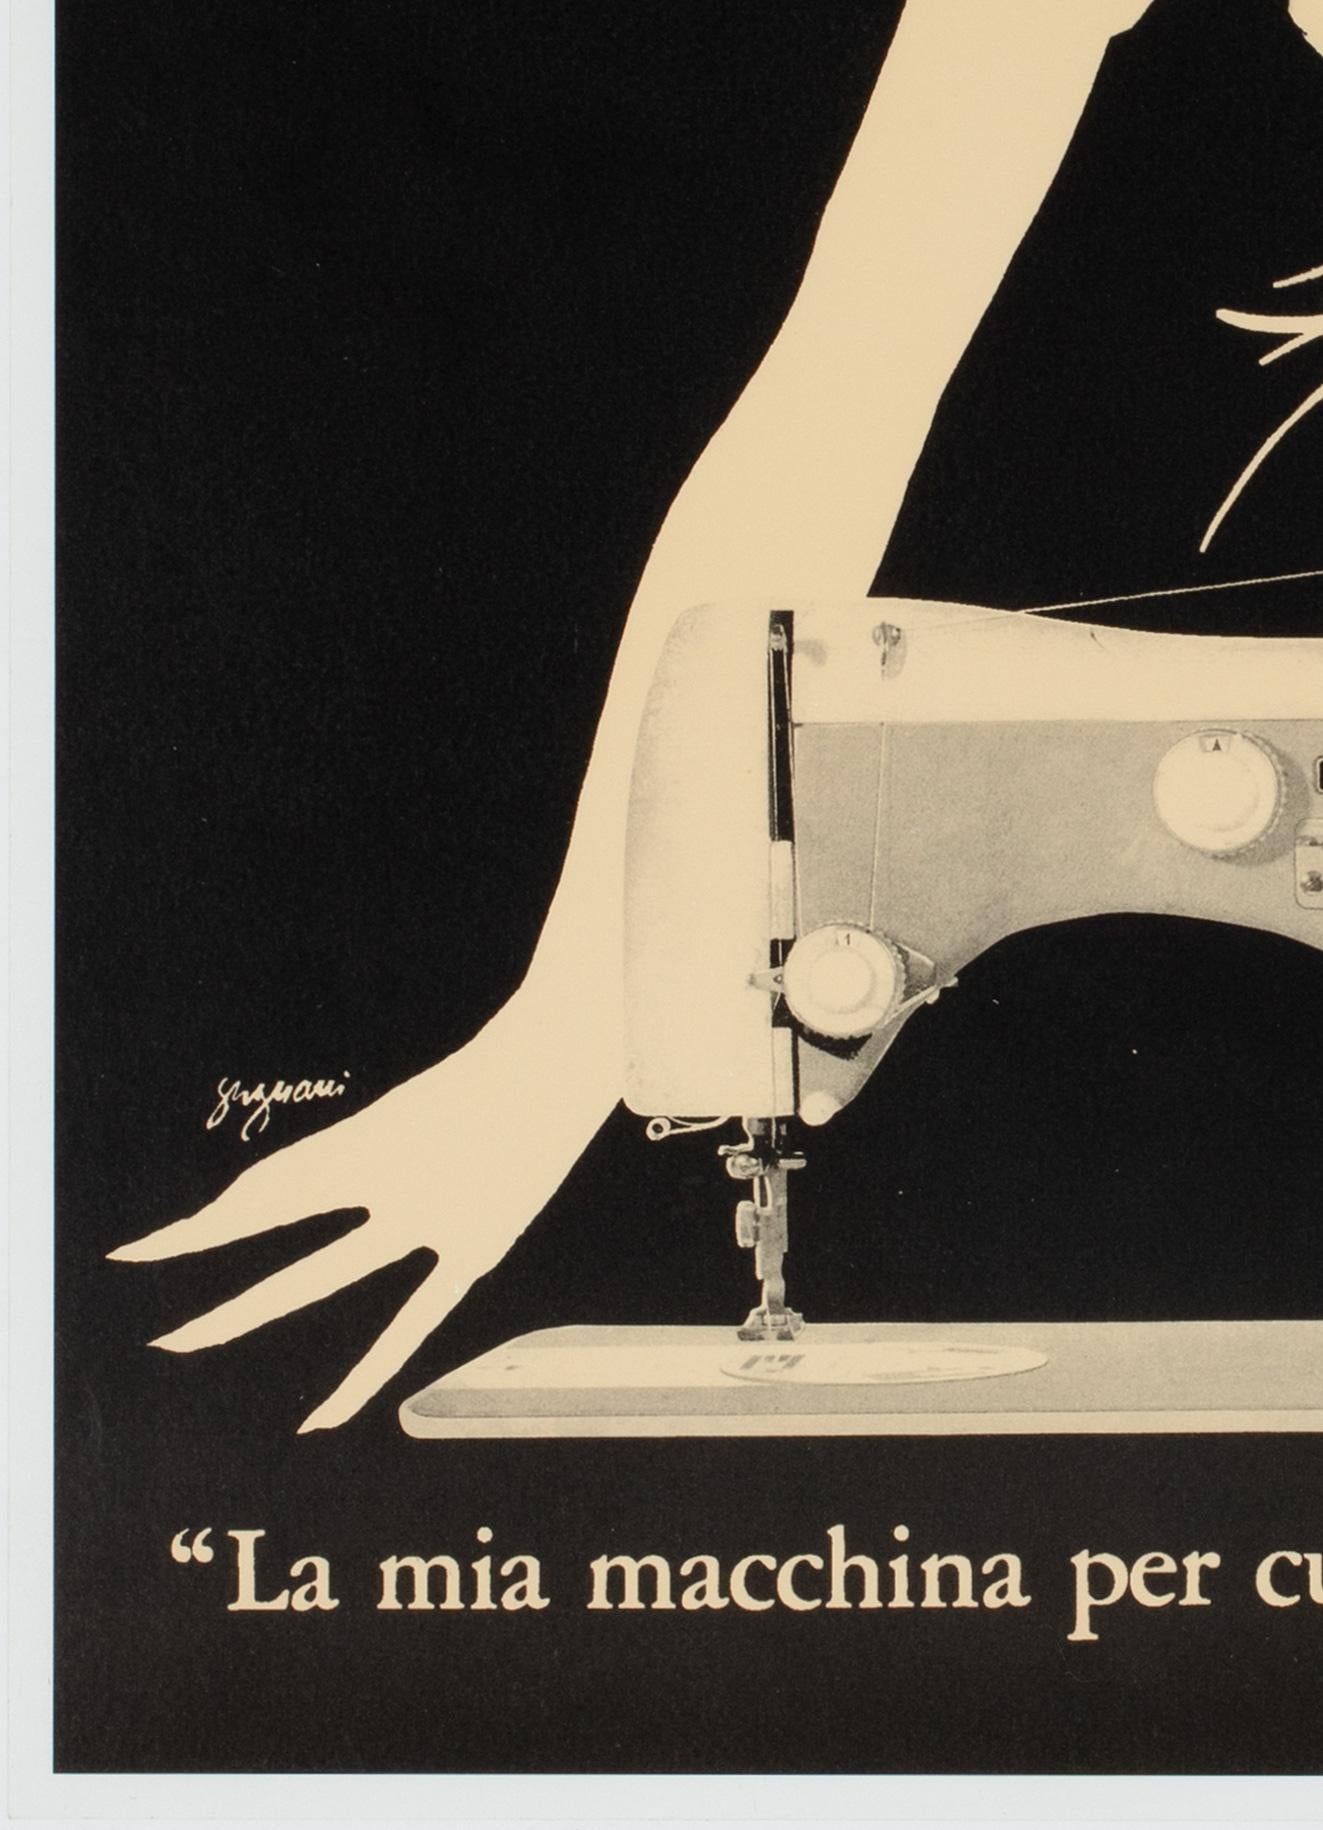 Linen Necchi 1980s Italian Sewing Machine Advertising Poster, Jeanne Grignani For Sale